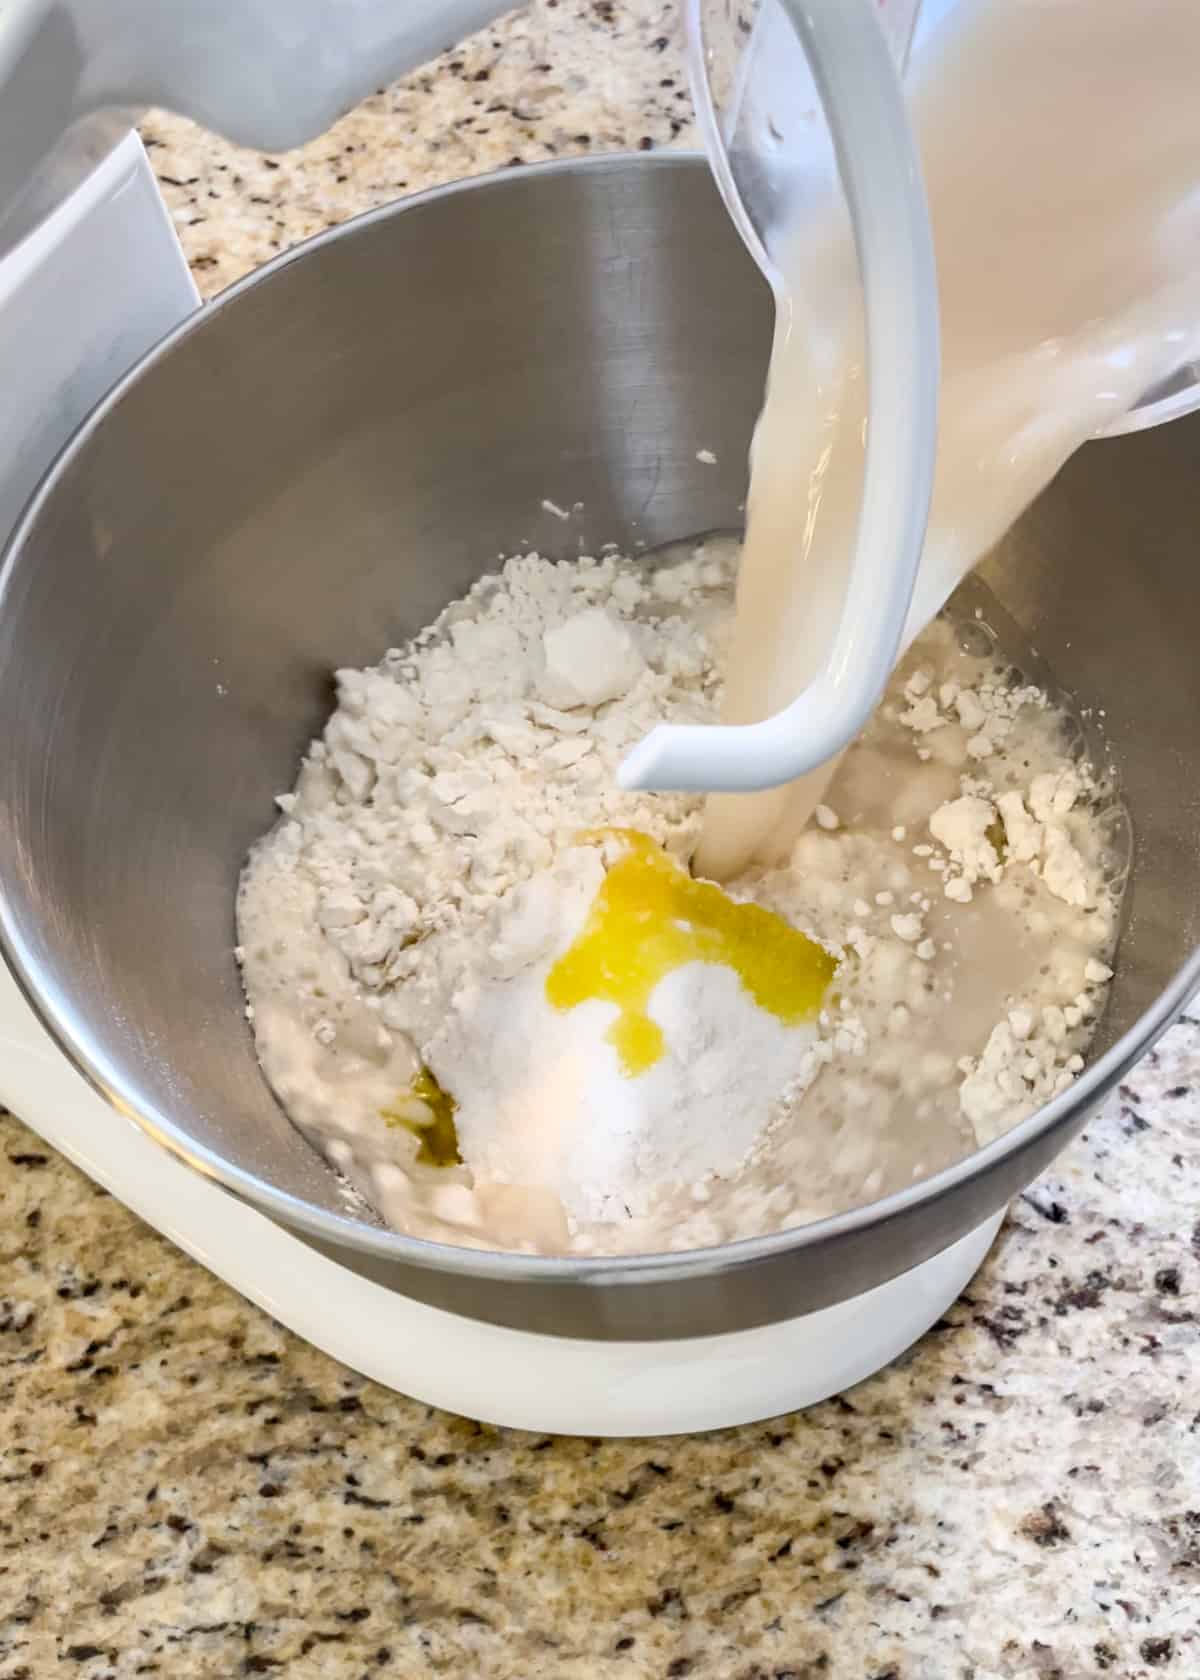 Yeast water being poured into a mixing bowl with flour, sugar, salt, and melted butter.